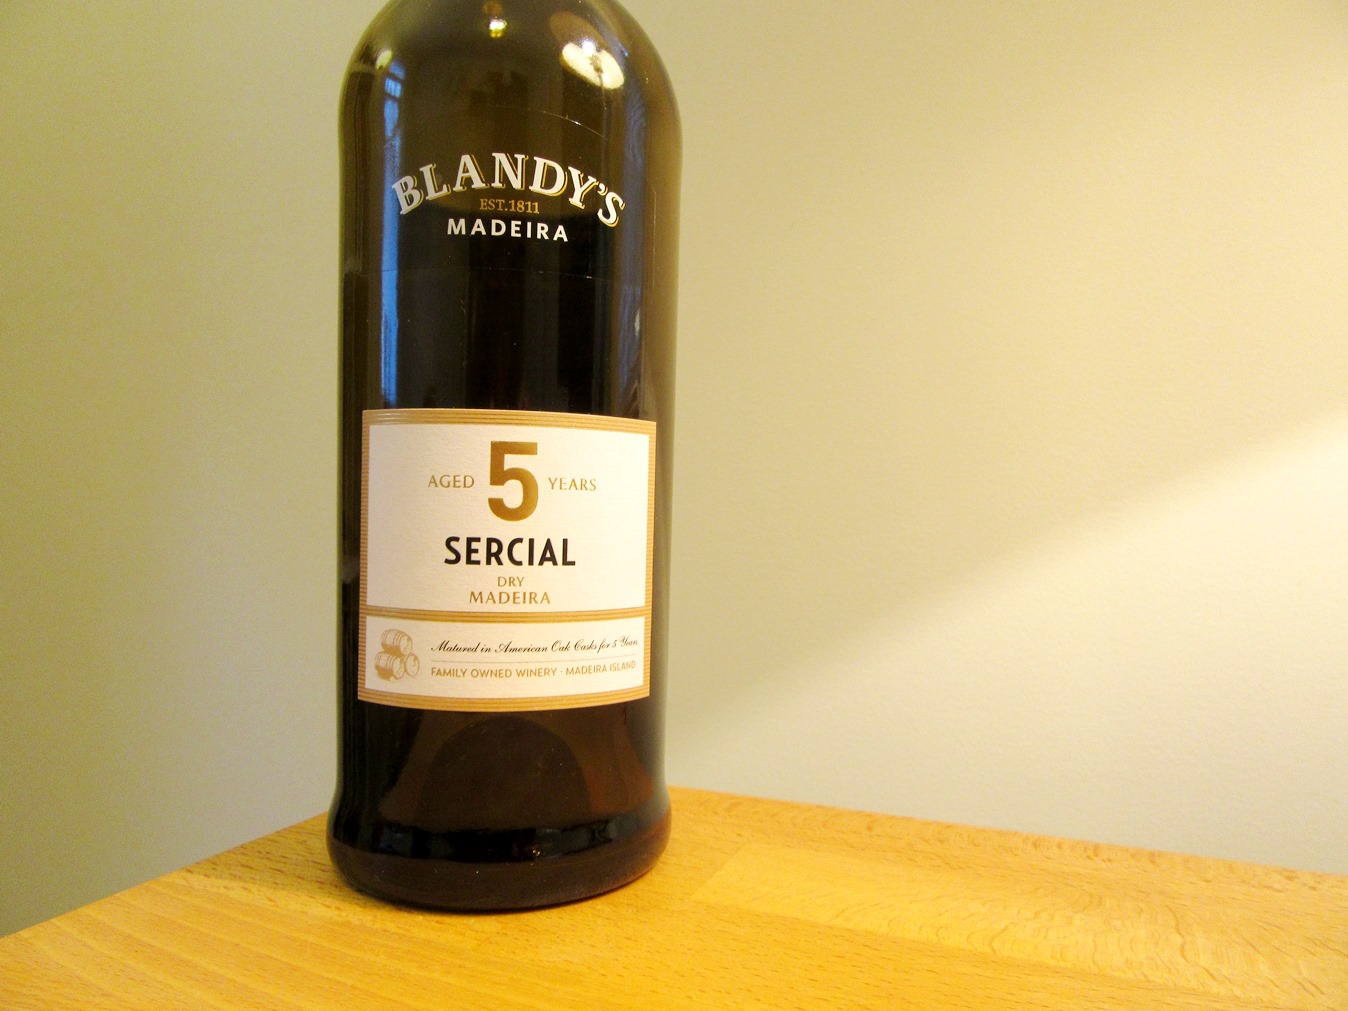 Blandy’s, 5 Years Old Sercial Dry Madeira, Portugal, Wine Casual